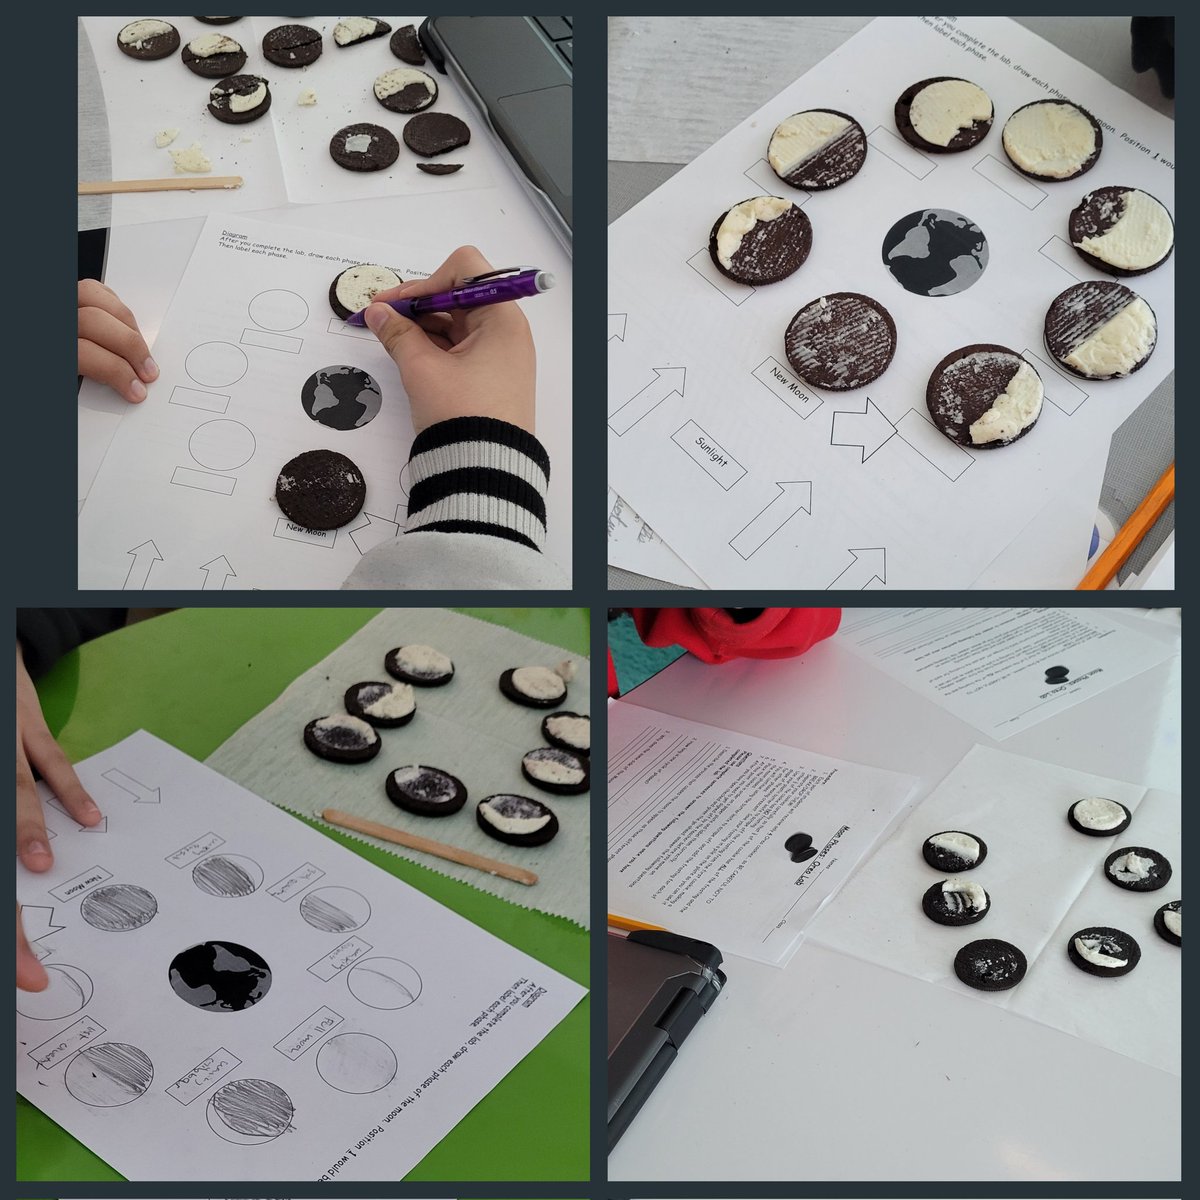 Today was a day of exploring, modeling, analyzing & predicting!! #MoonPhases #KinestheticLearning #Analyzing #Predicting